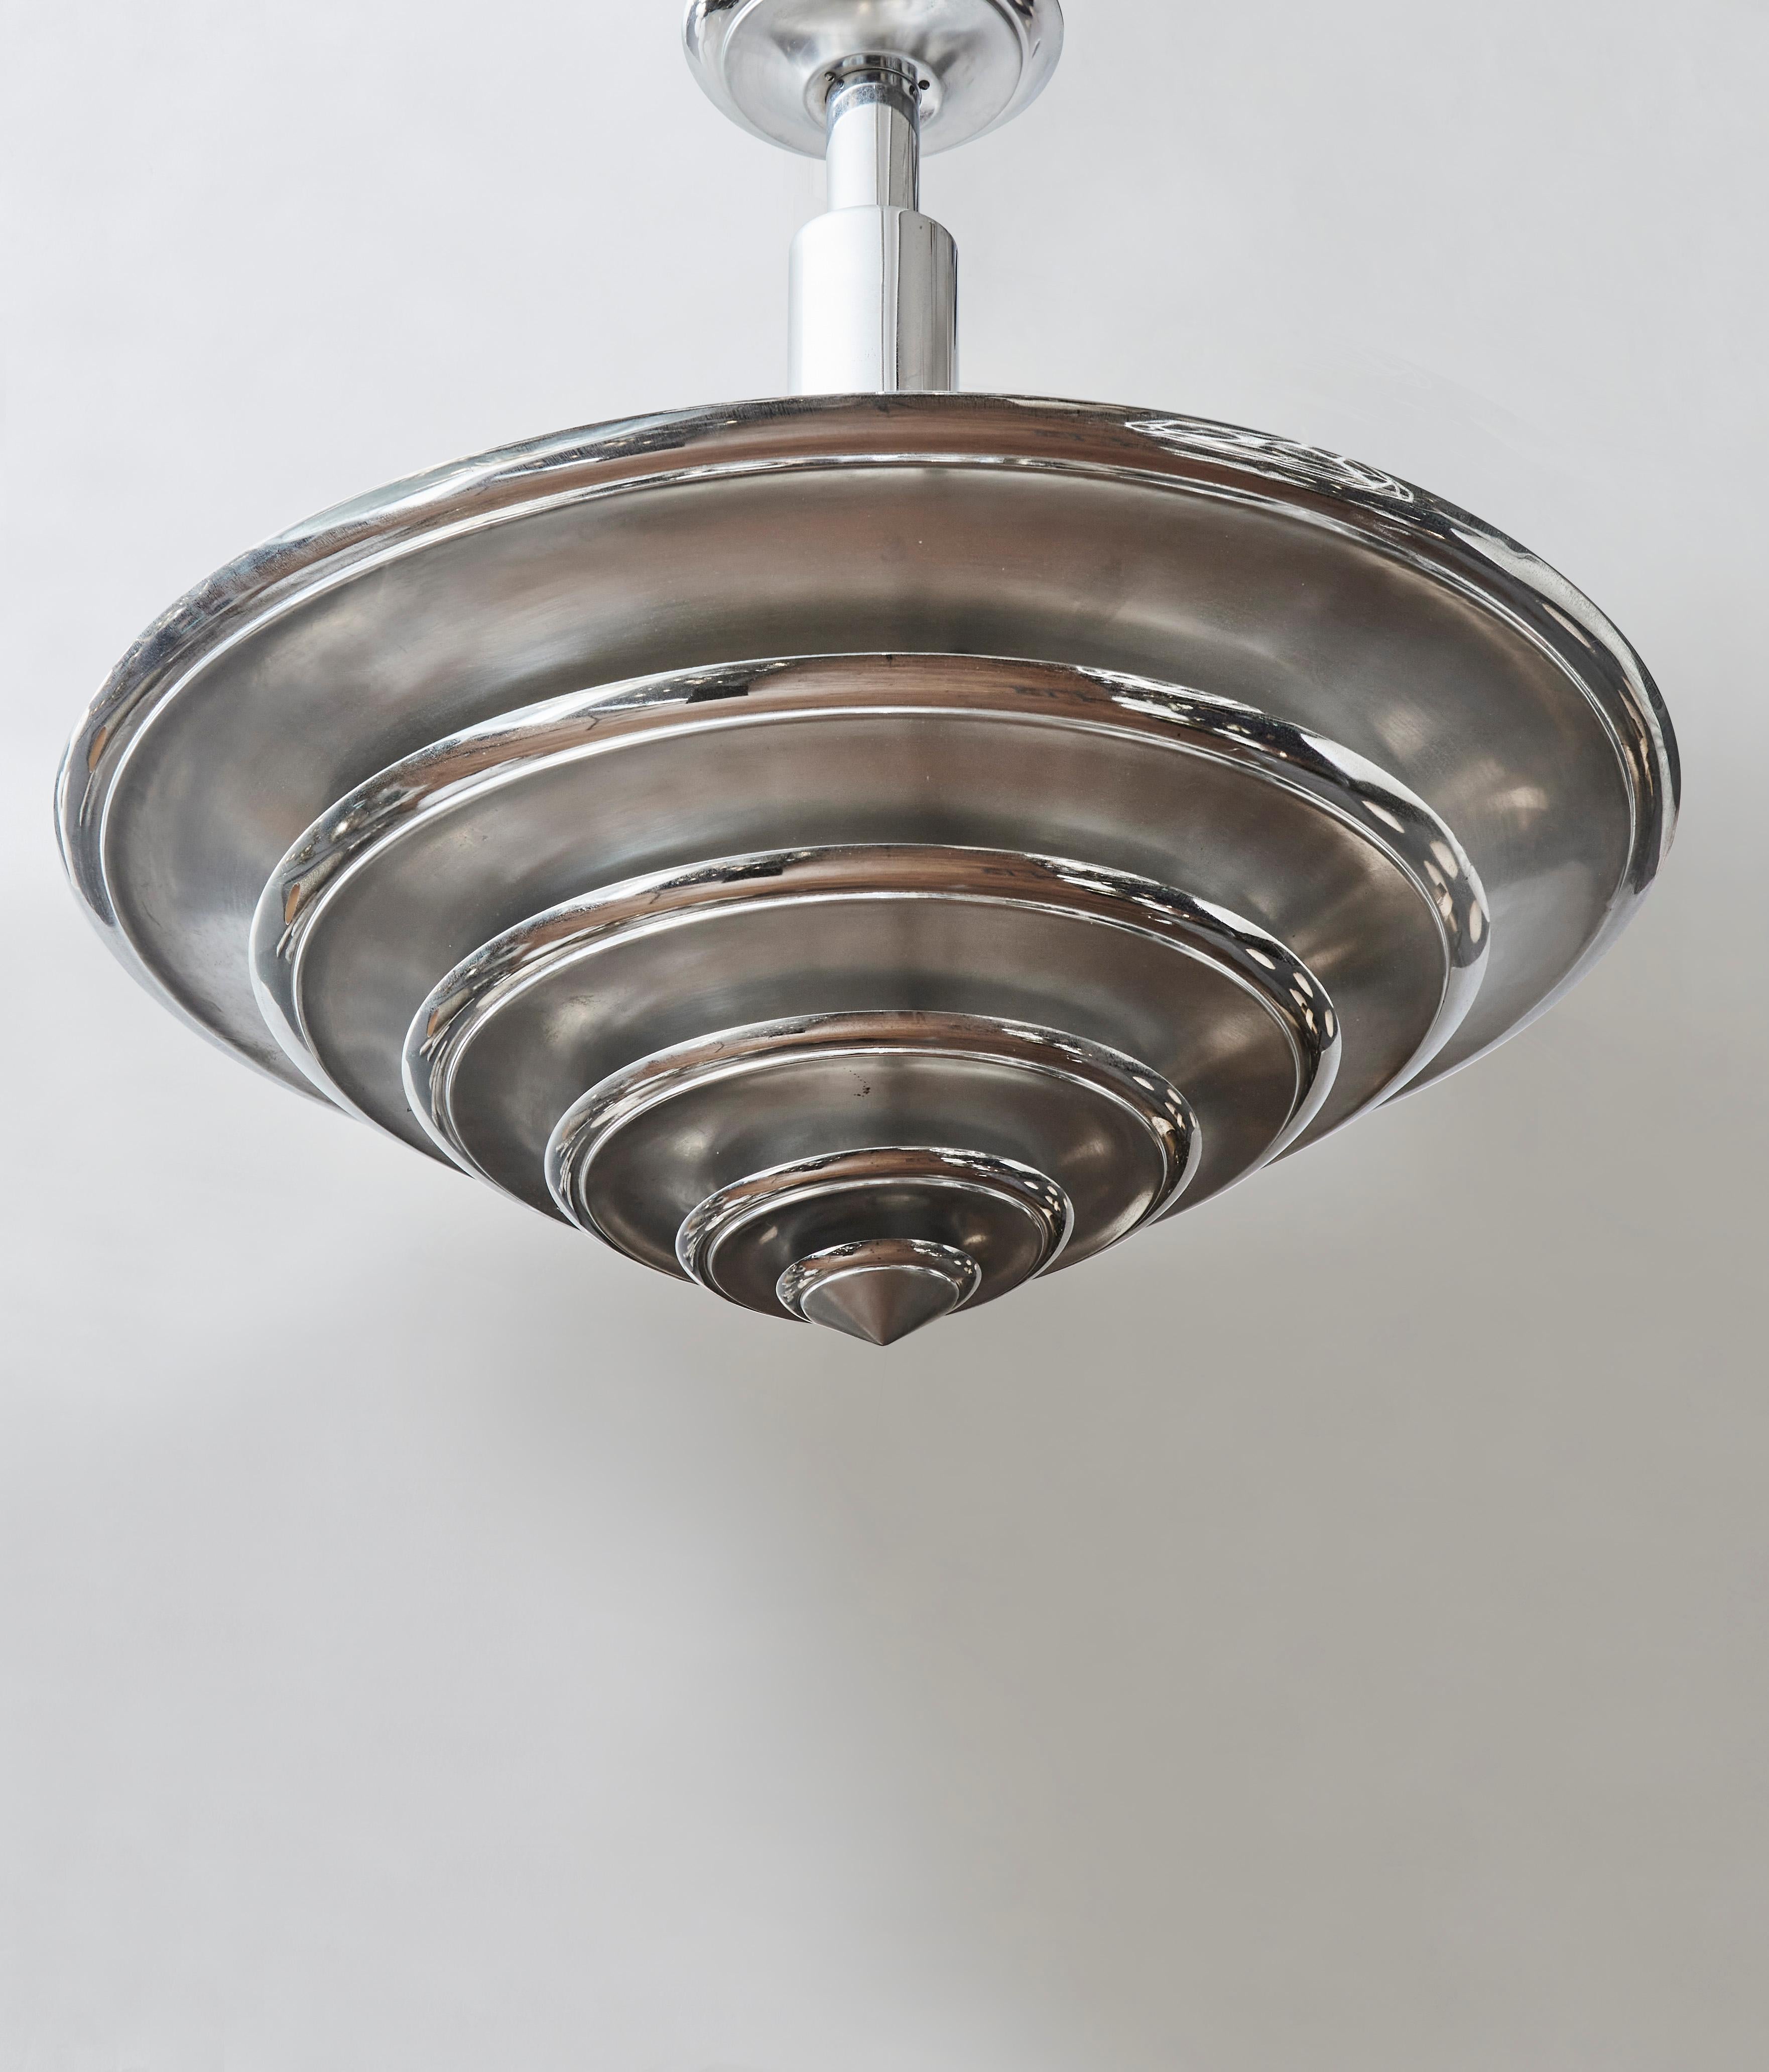 Very nice chandelier made of a central stem and a conical metal shade made of different sized rings.

Three lights inside the cone, enlightening the ceiling and through the rings.